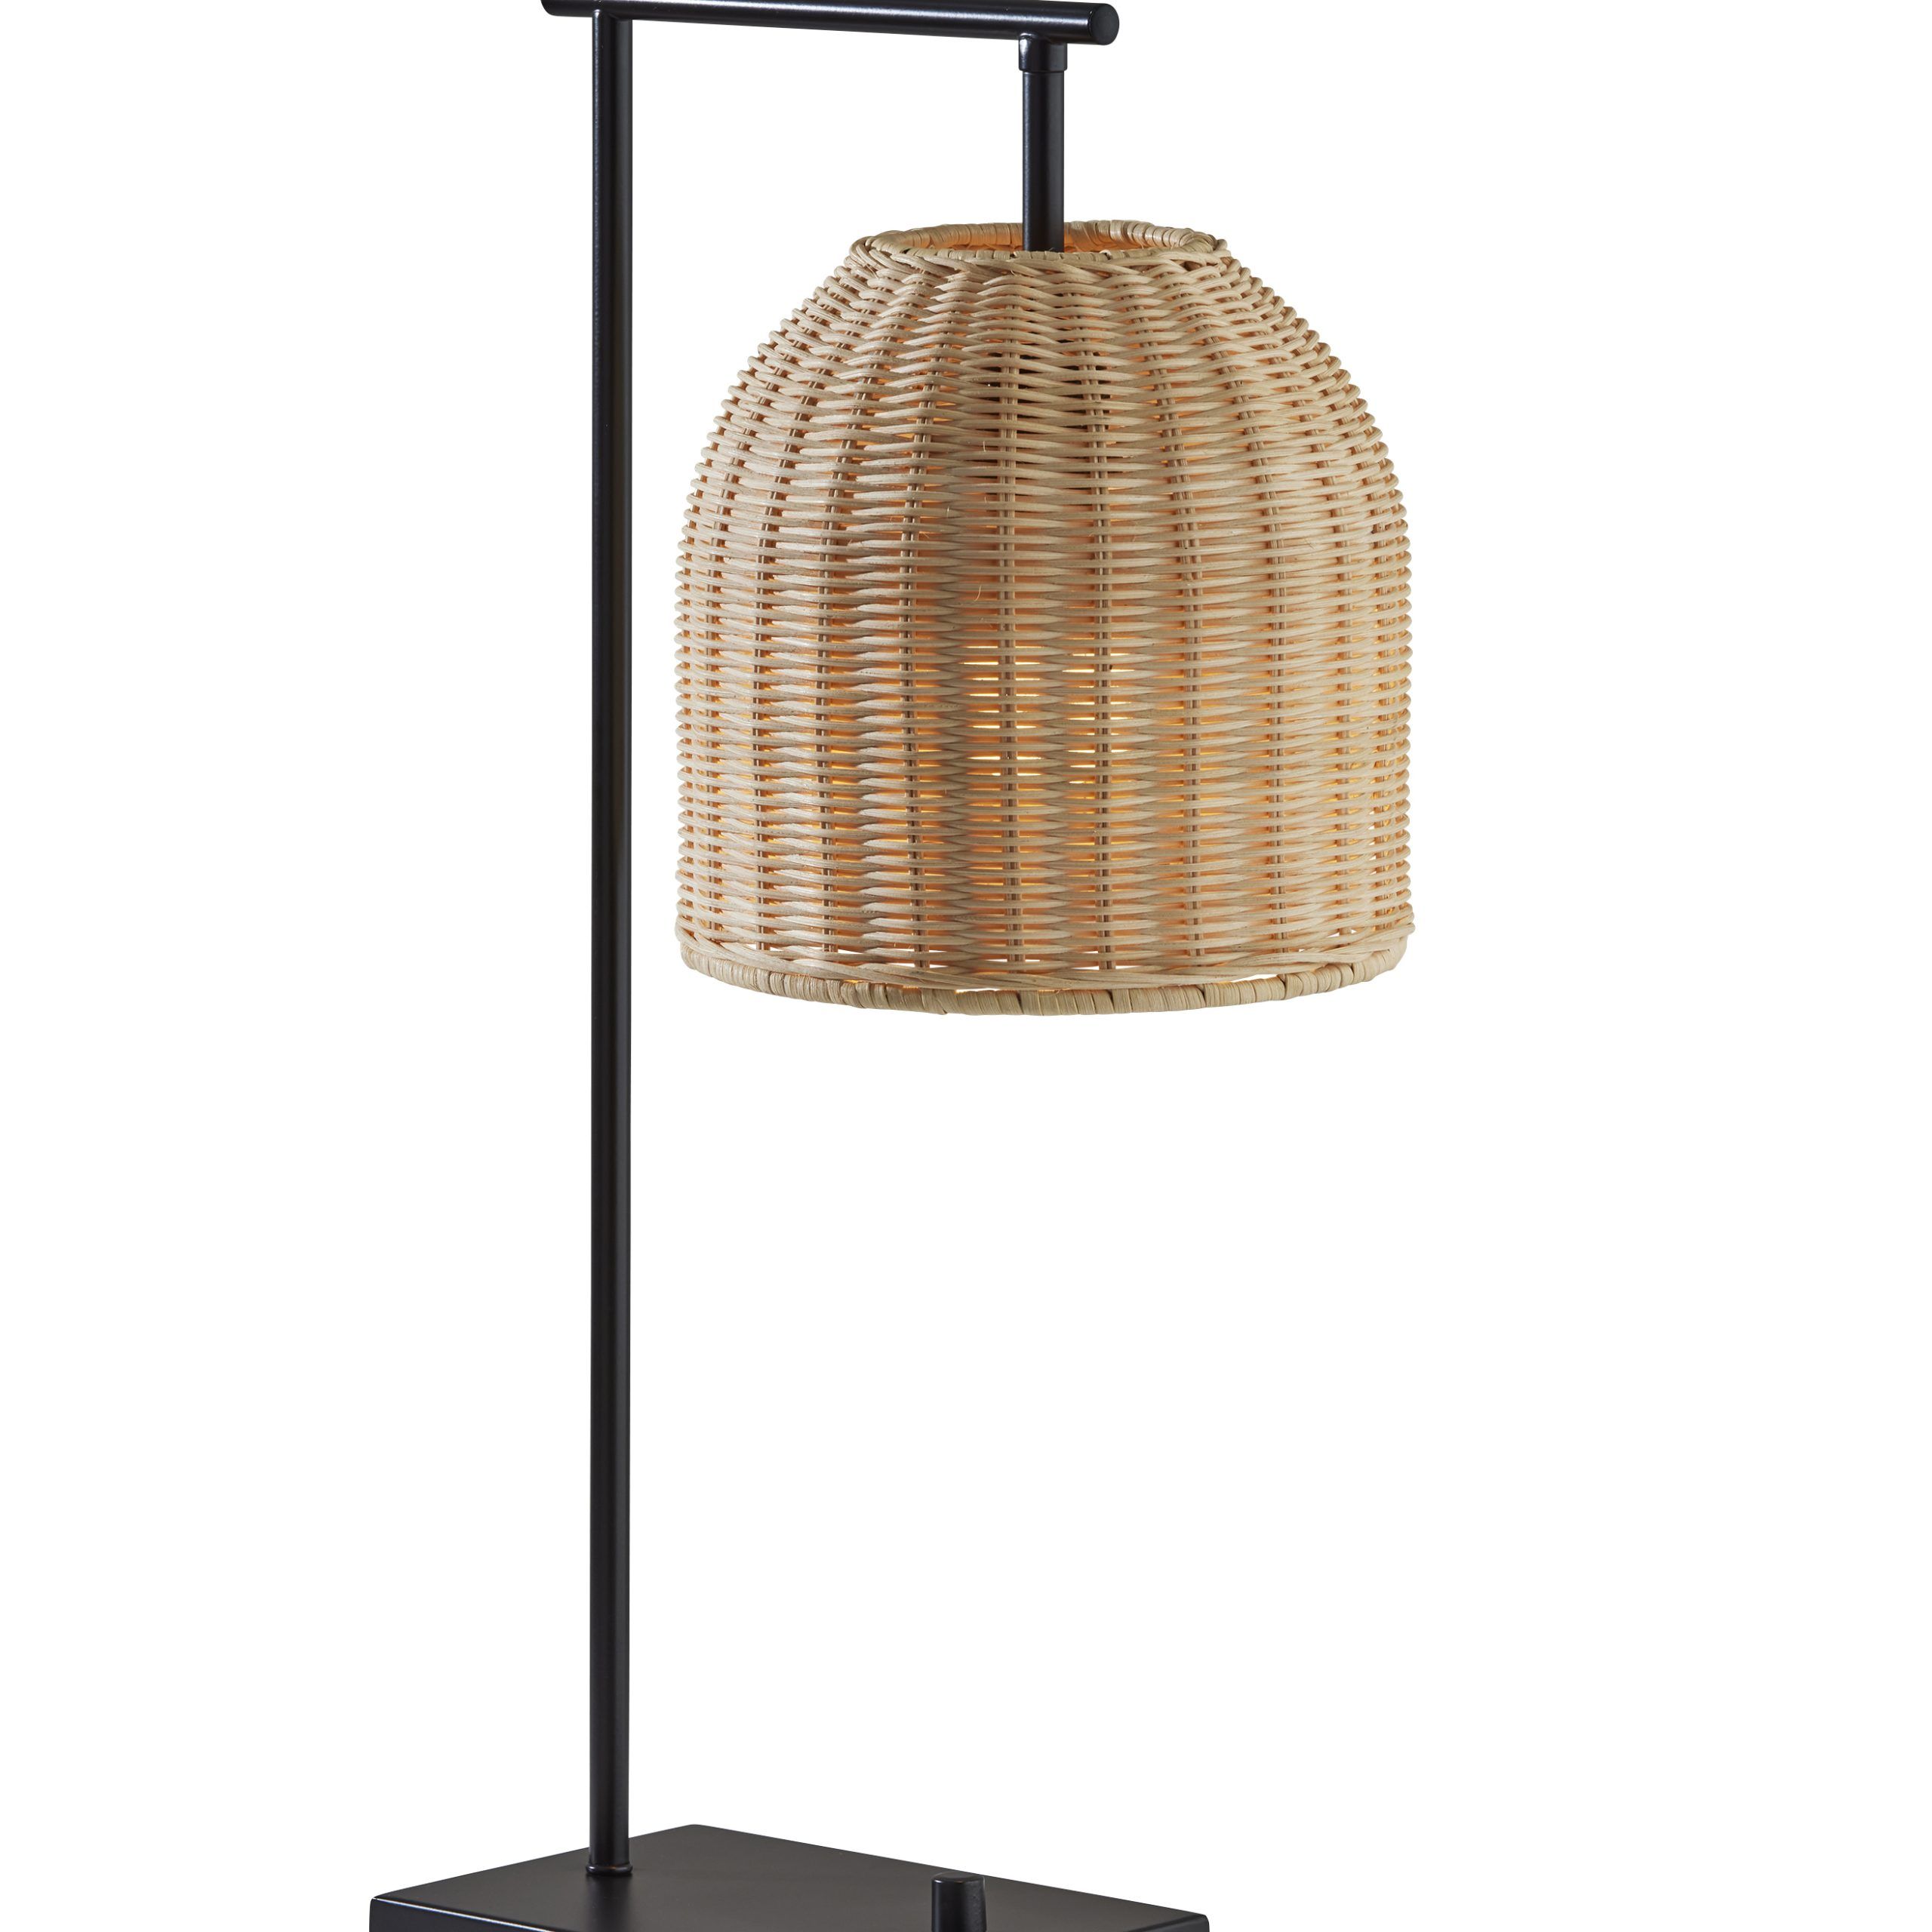 Woven Cane Standing Lamps With Regard To 2019 Adesso Bahama Table Lamp, Dark Bronze, Light Natural Rattan Shade –  Walmart (View 7 of 10)